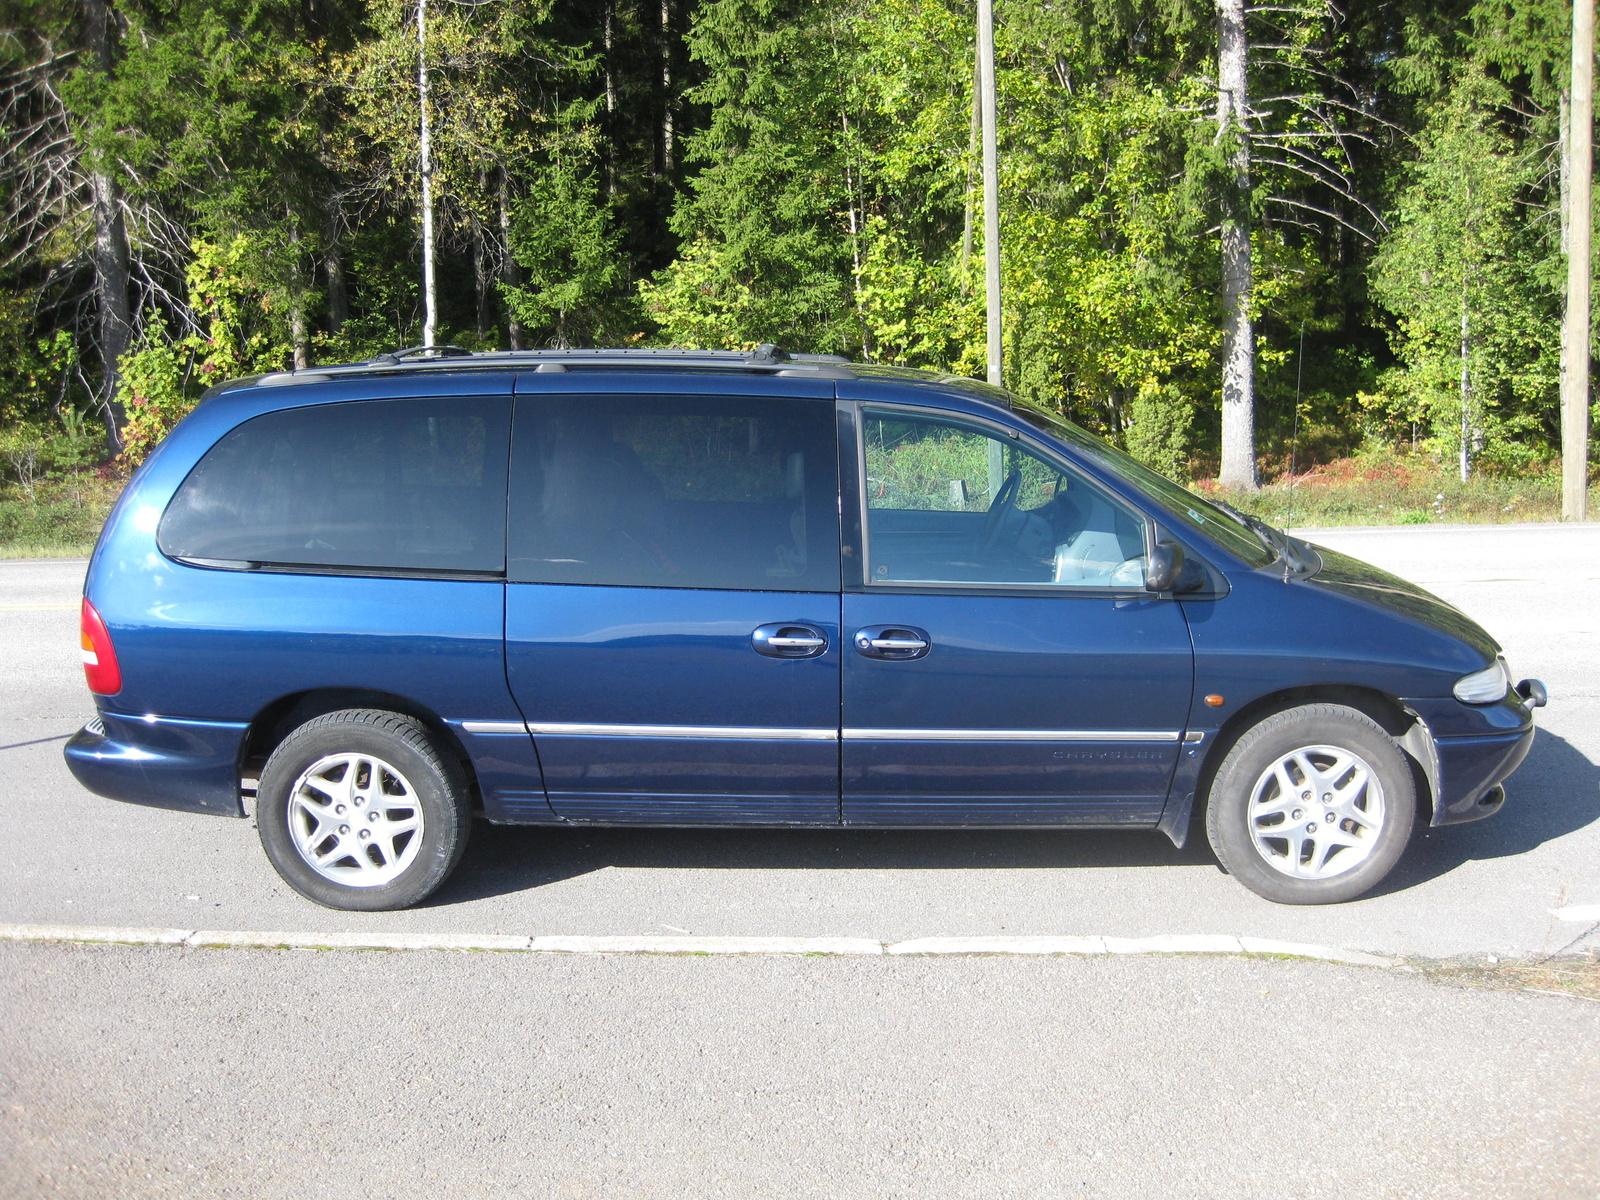 2000 Chrysler Grand Voyager - Information and photos - Neo Drive